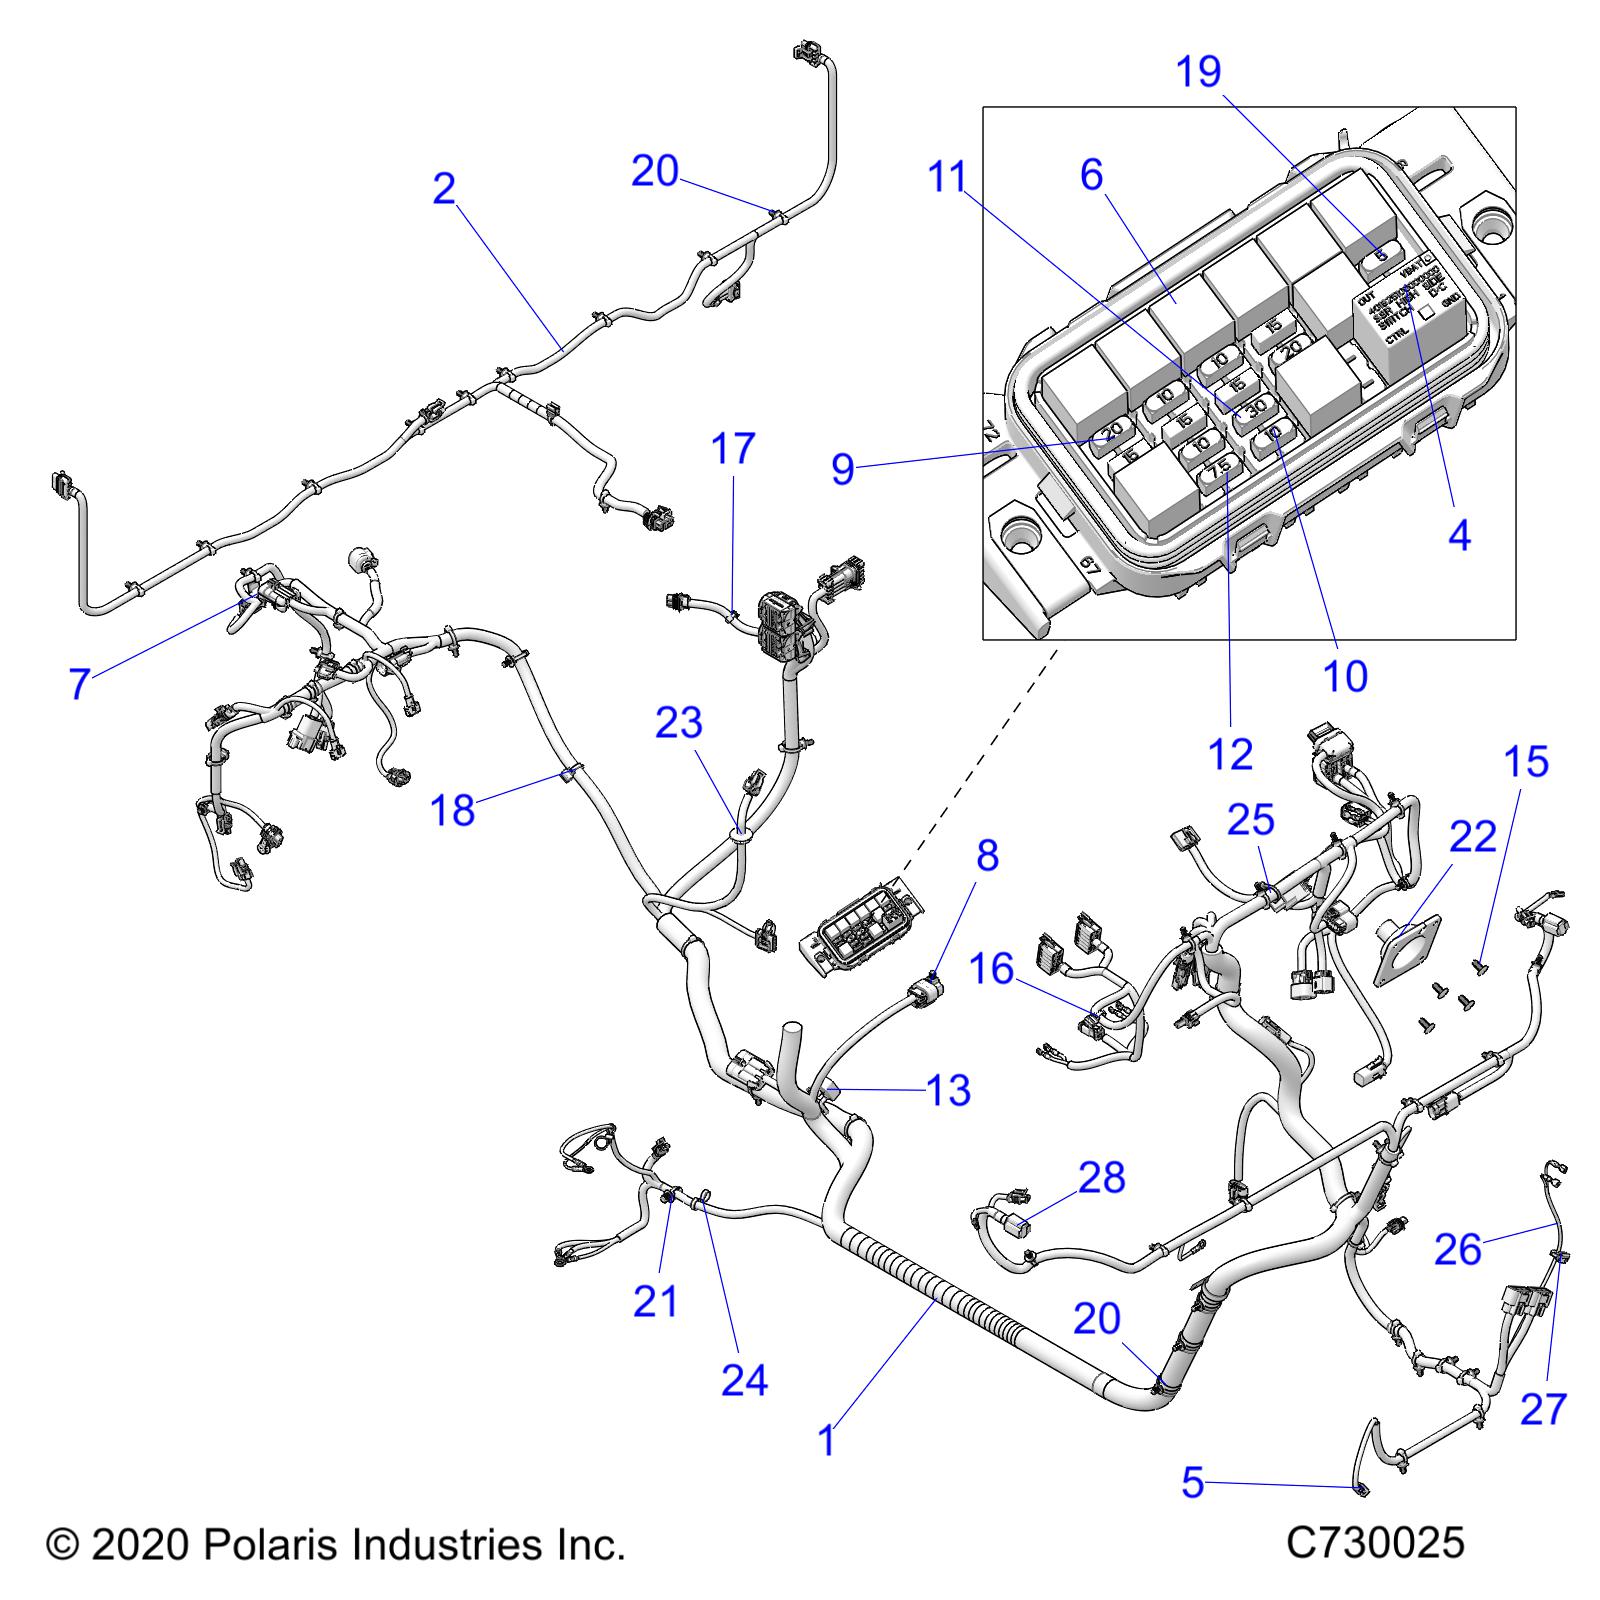 Part Number : 2415990 HARNESS-CHASSIS FS RGR TRC